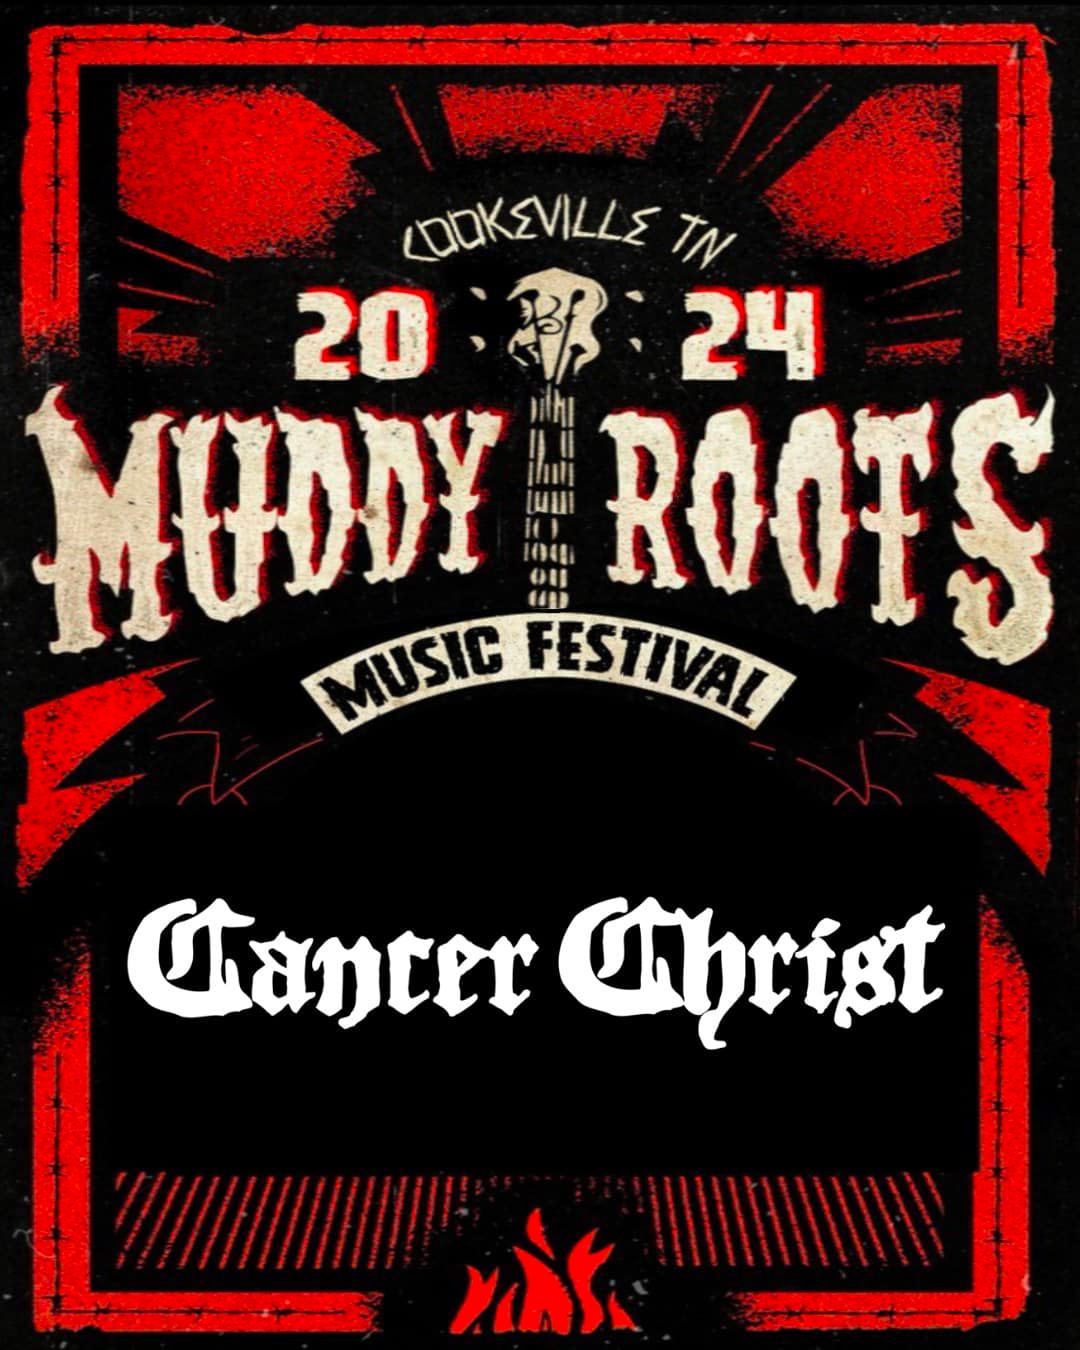 Cancer Christ at Muddy Roots Music Festival 